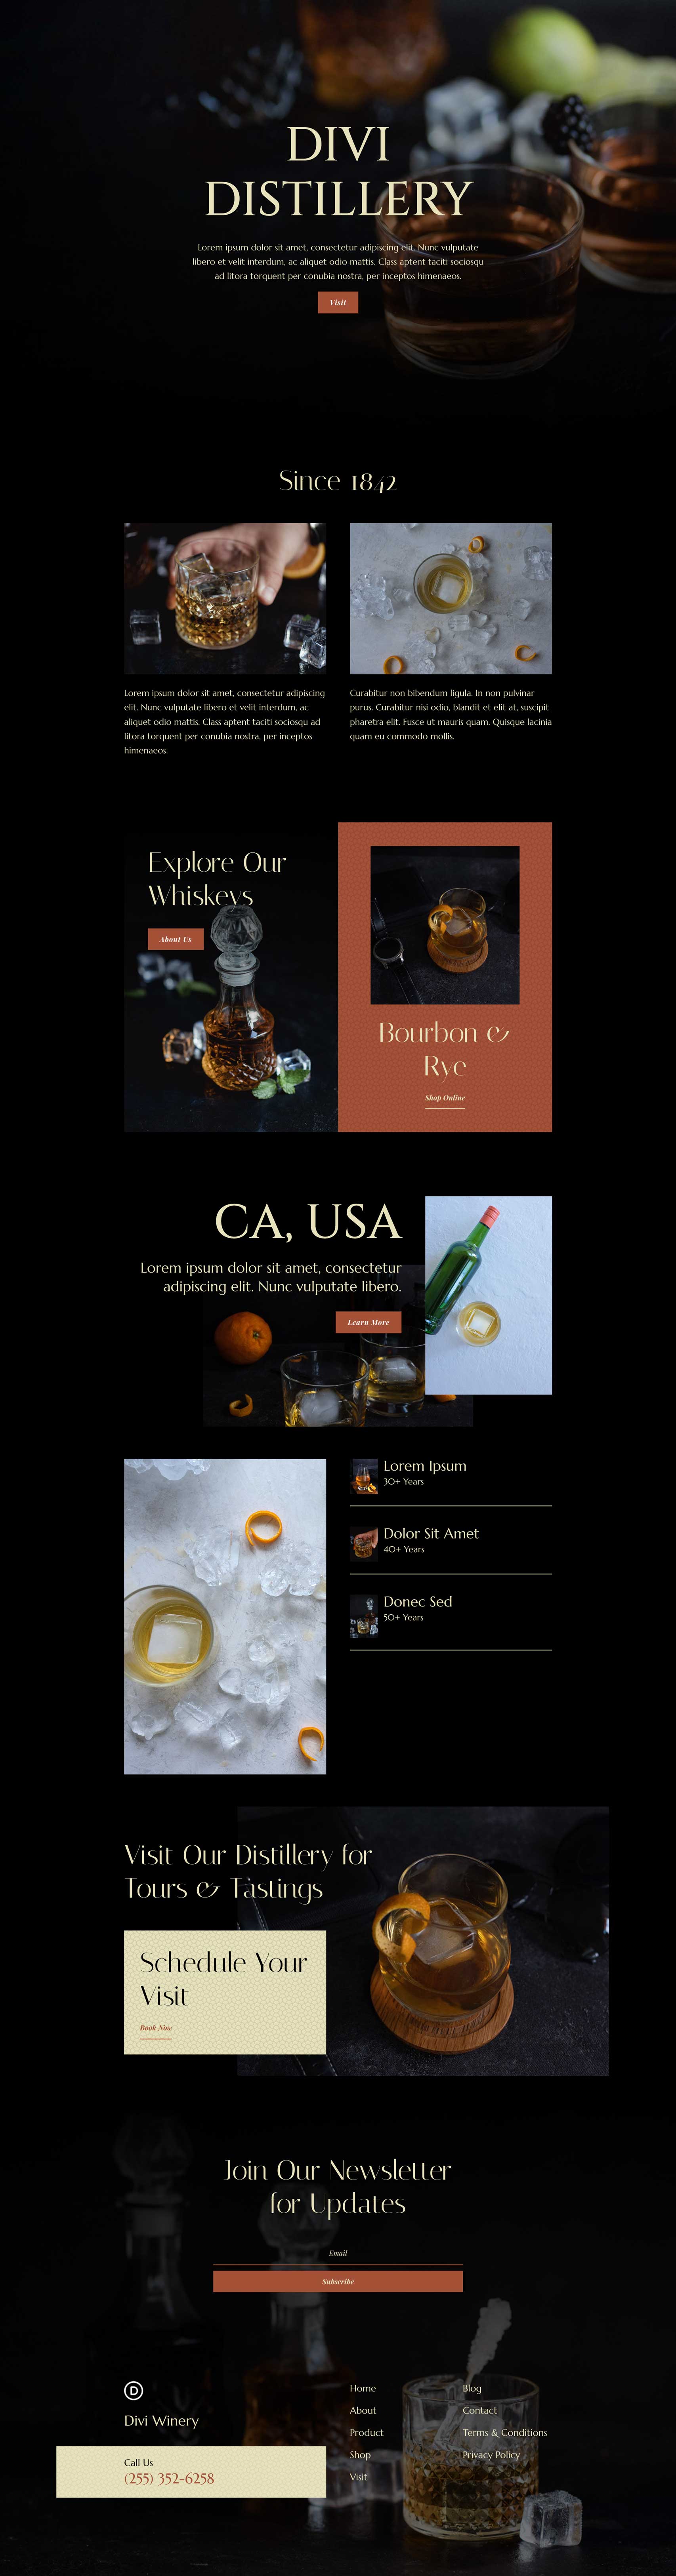 whiskey-home-page Get a Free Whiskey Distillery Layout Pack for Divi